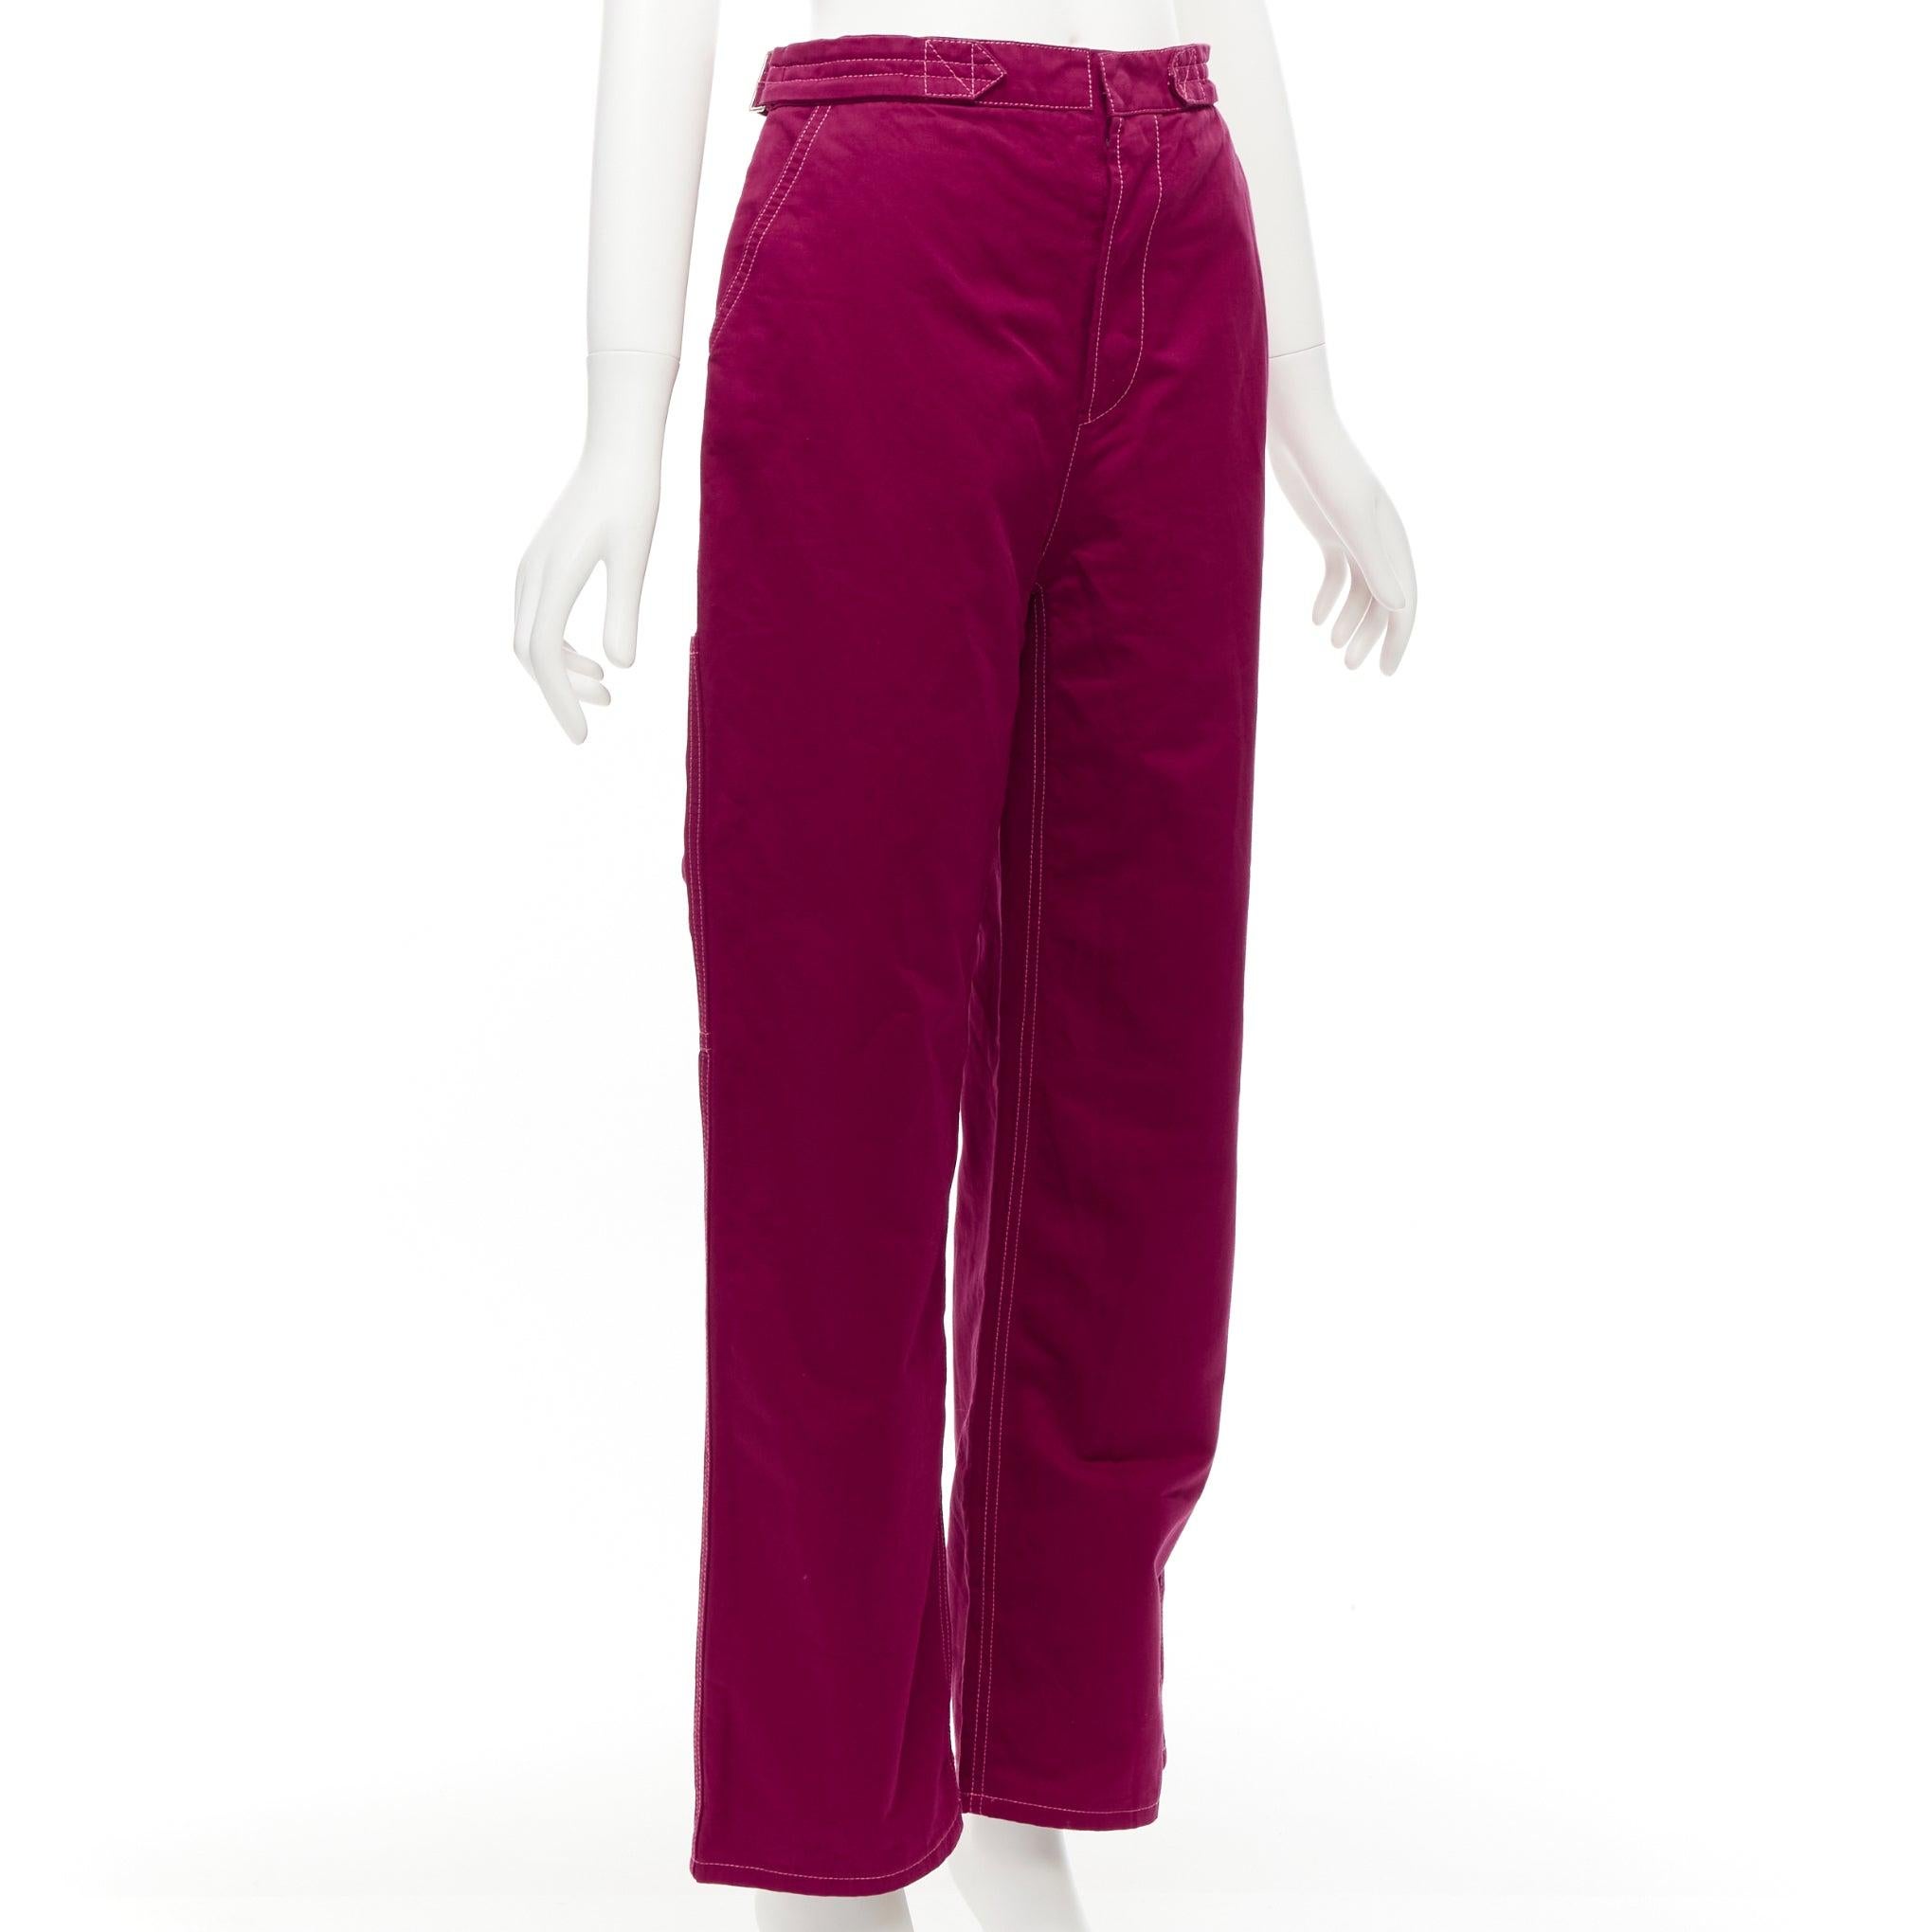 MARNI burgundy cotton linen topstitch belt waist wide leg pants IT38 XS
Reference: CELG/A00252
Brand: Marni
Material: Cotton, Linen
Color: Burgundy
Pattern: Solid
Closure: Snap Buttons
Extra Details: Snap buttons closure front fly.
Made in: